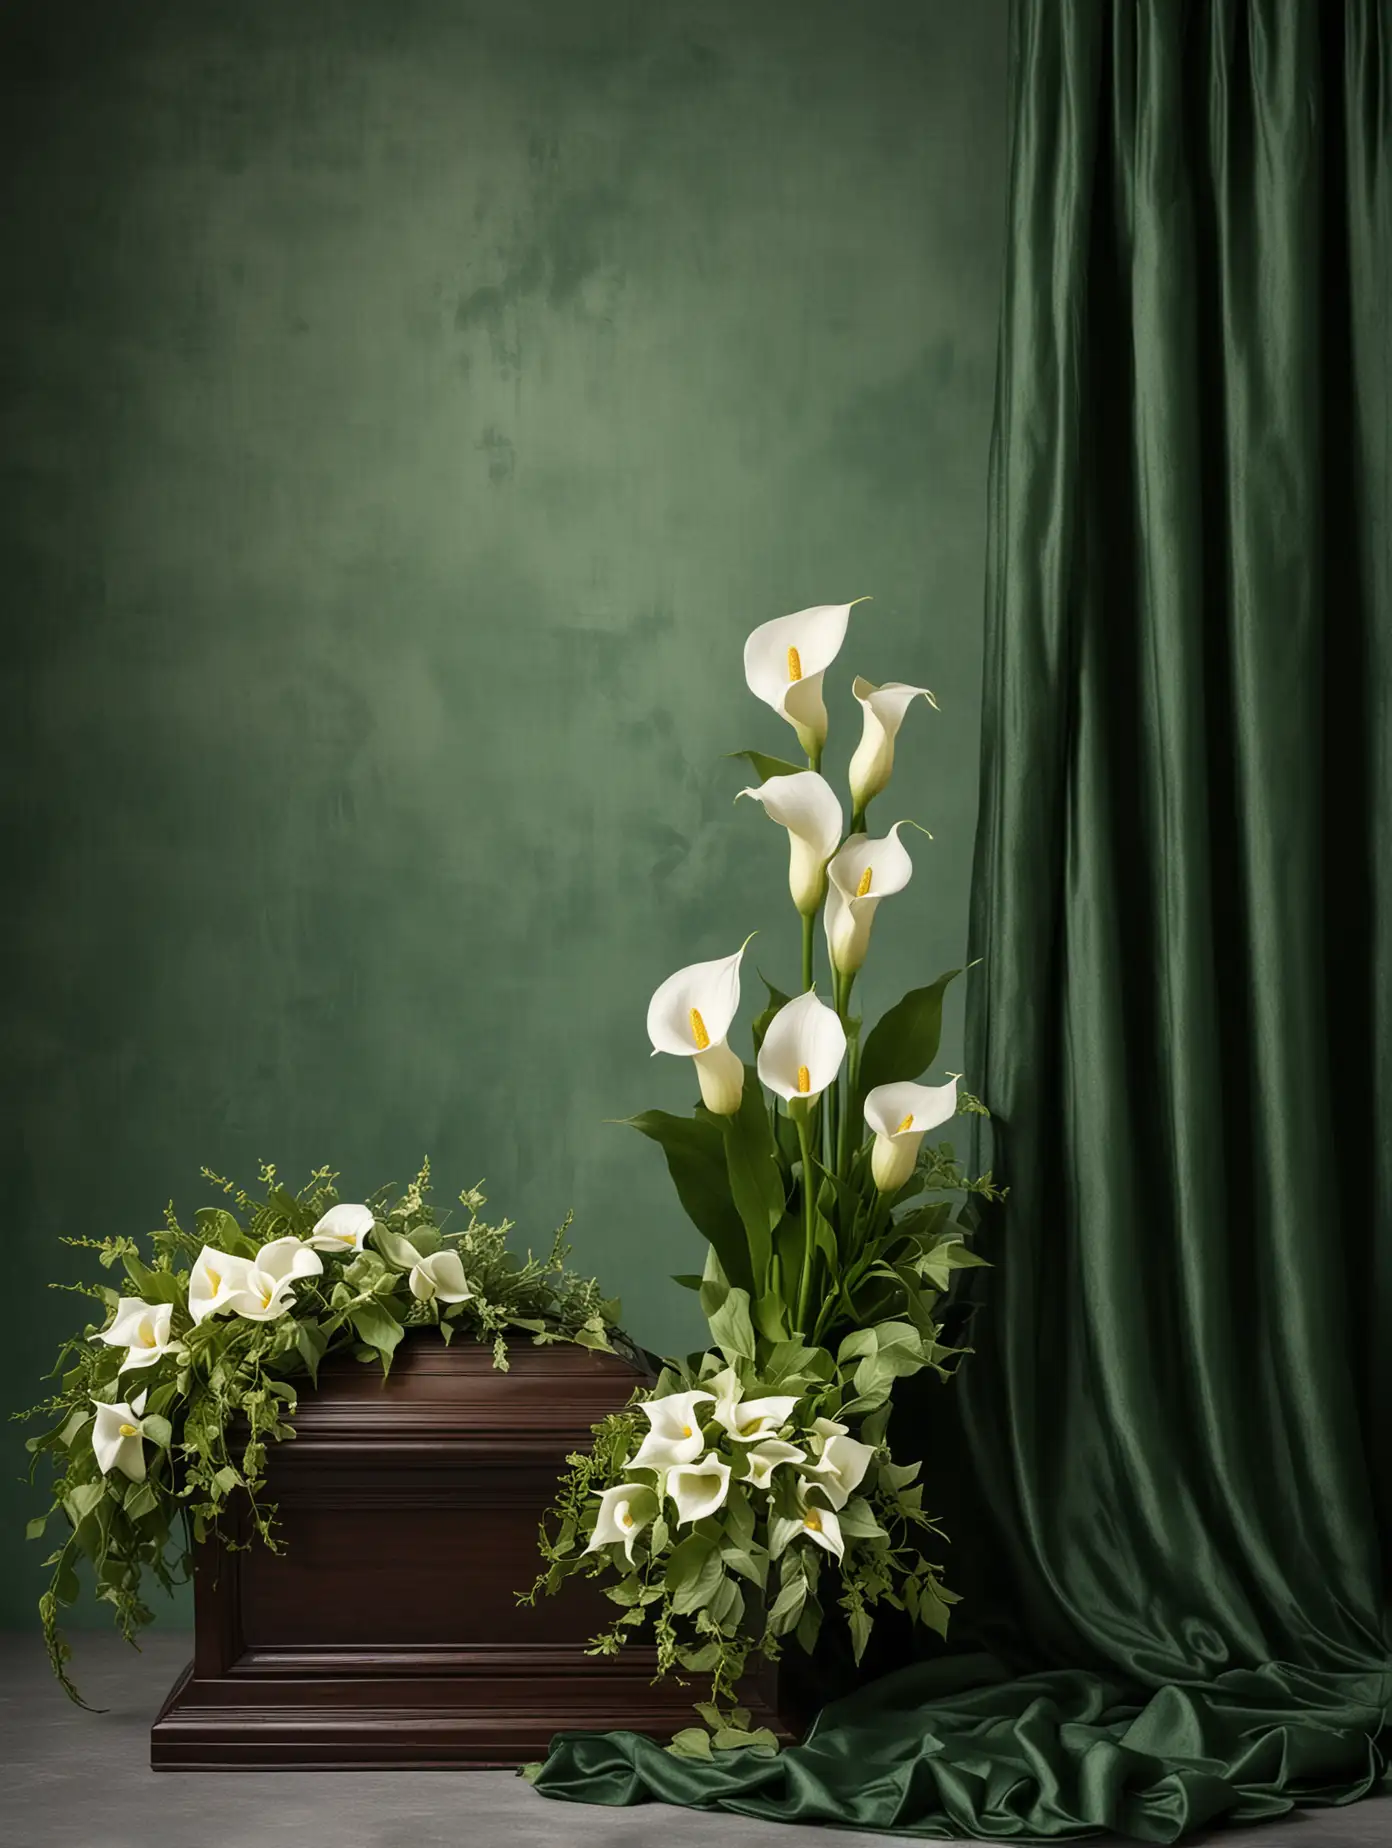 Funeral decoration; on the left, against a background of draped green fabric, a funeral urn, next to the urn a small bouquet of calla and ivy, green velvet background